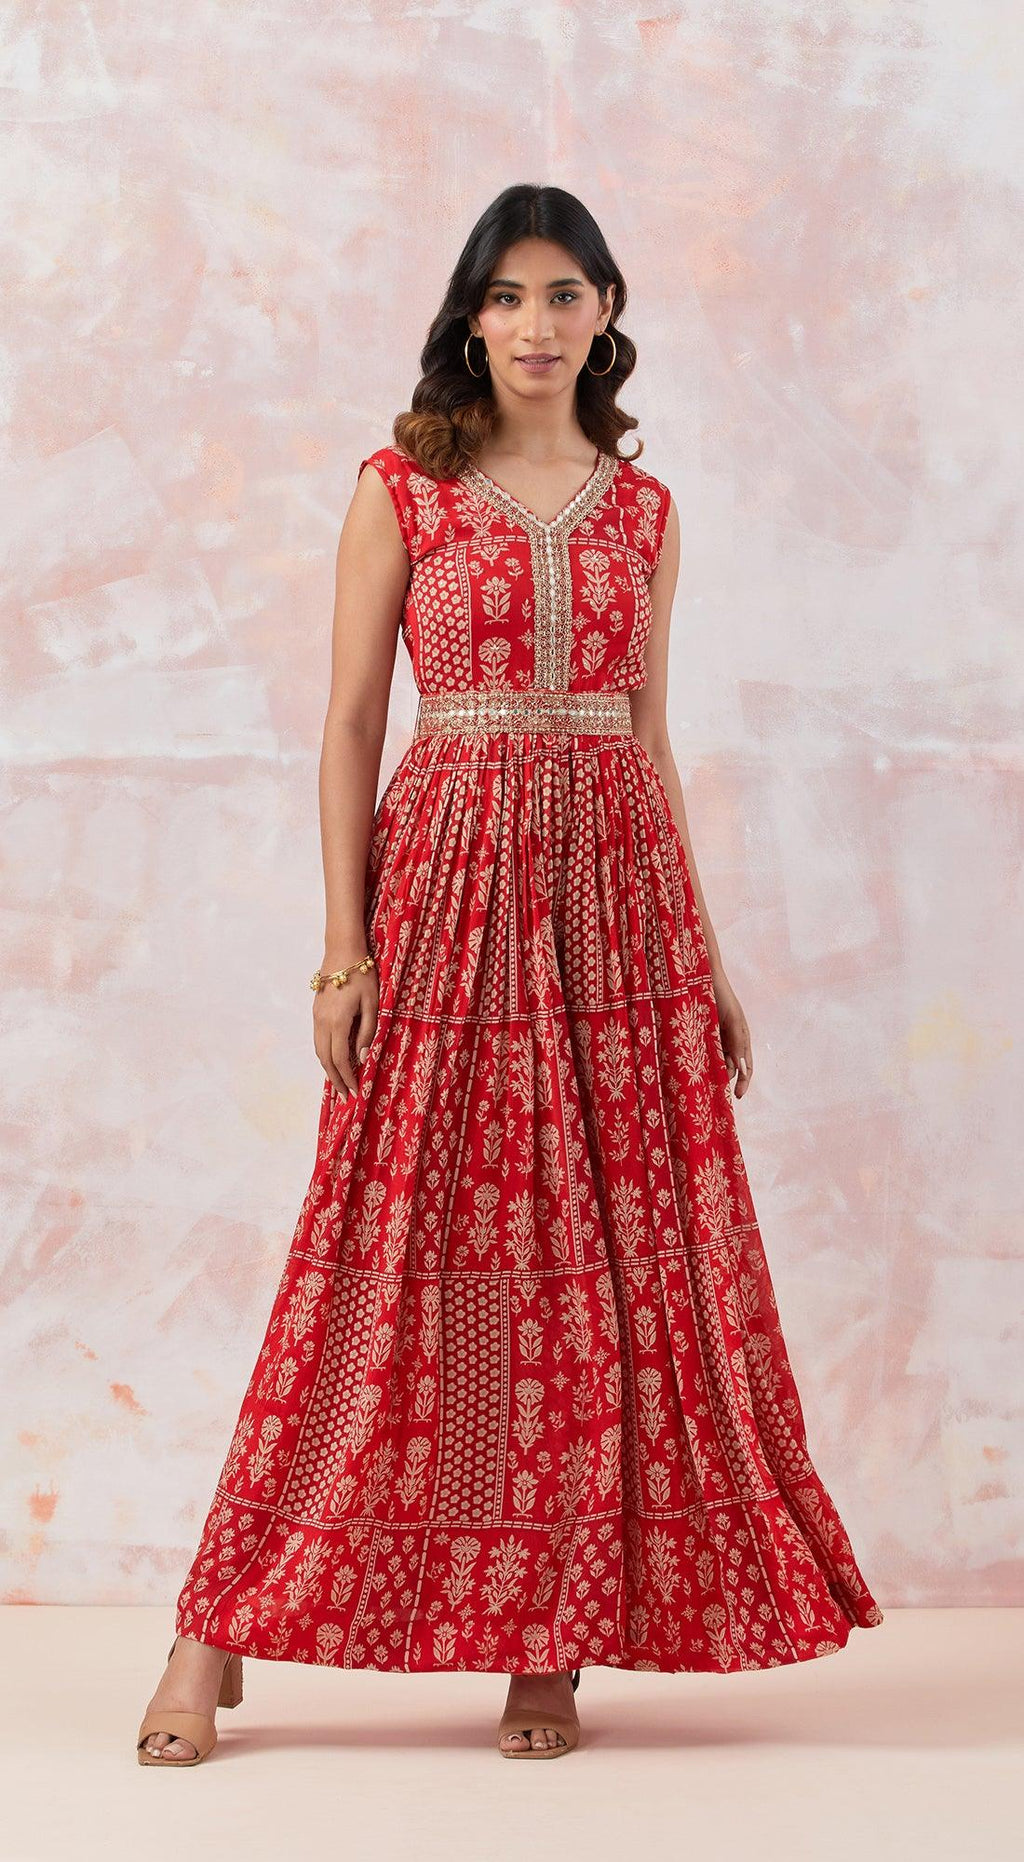 Red Jumpsuit With Embroidered Belt - Basanti Kapde aur Koffee